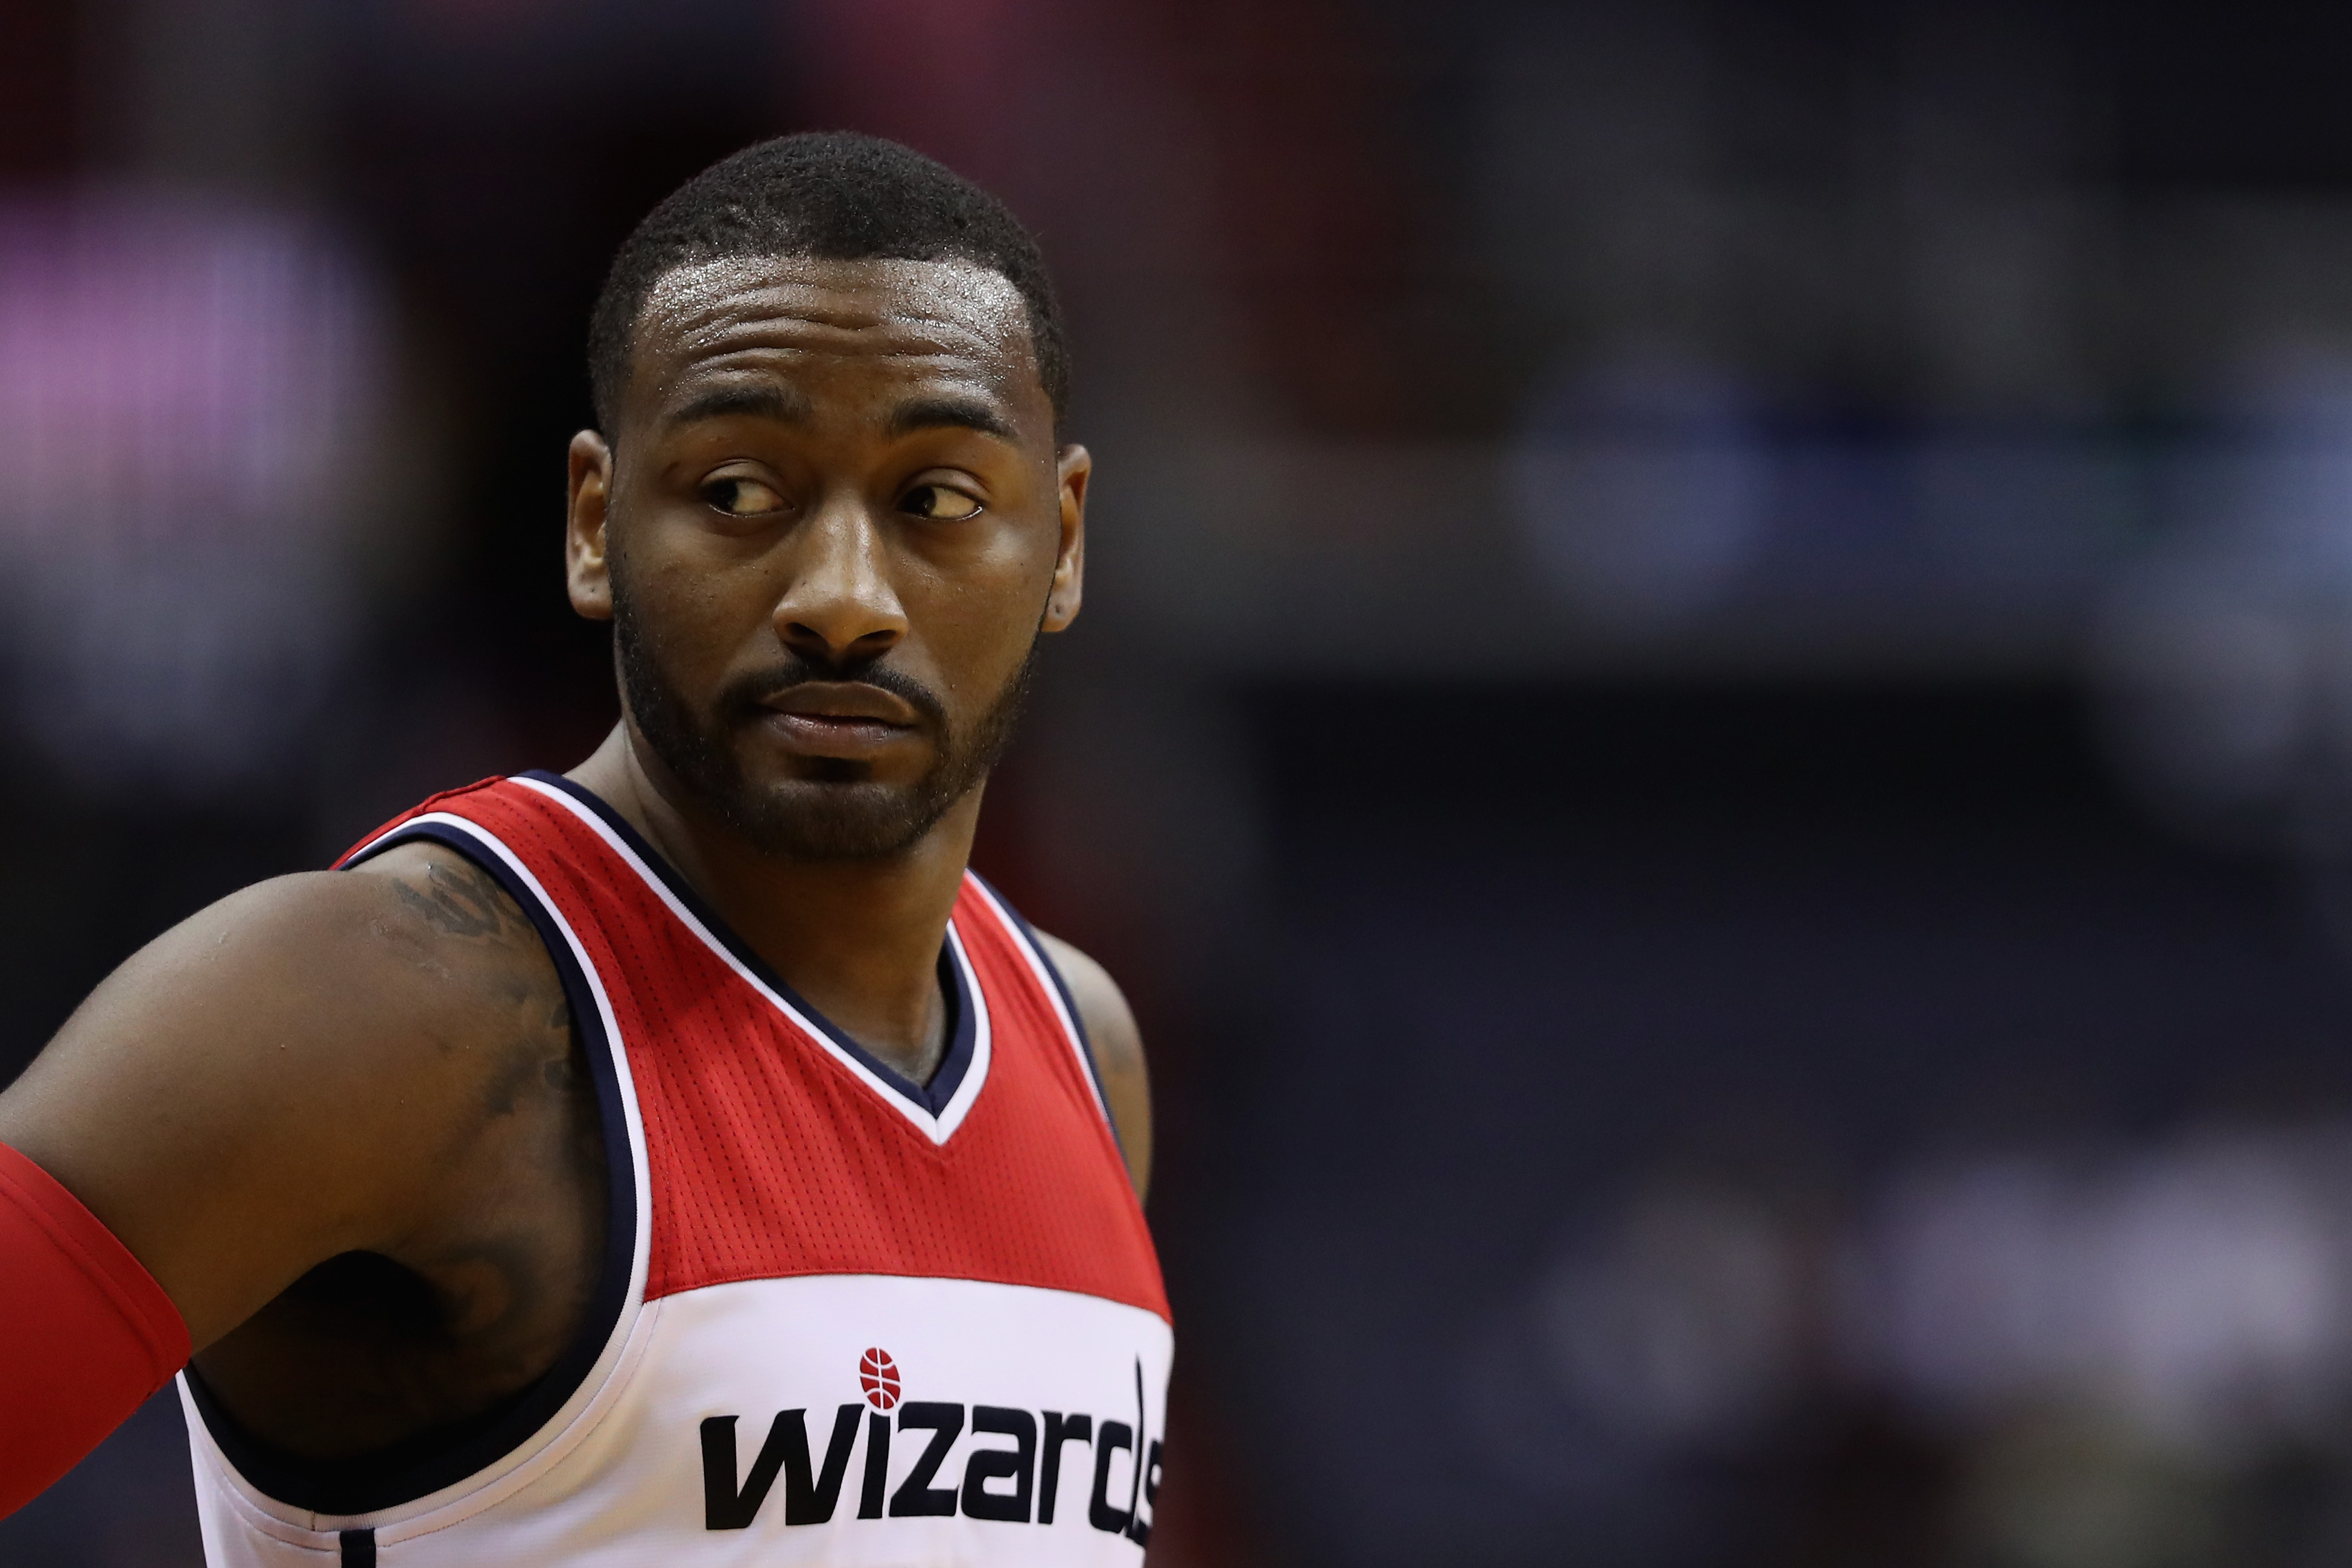 Washington Wizards Roster & Starting Lineup Against Kings